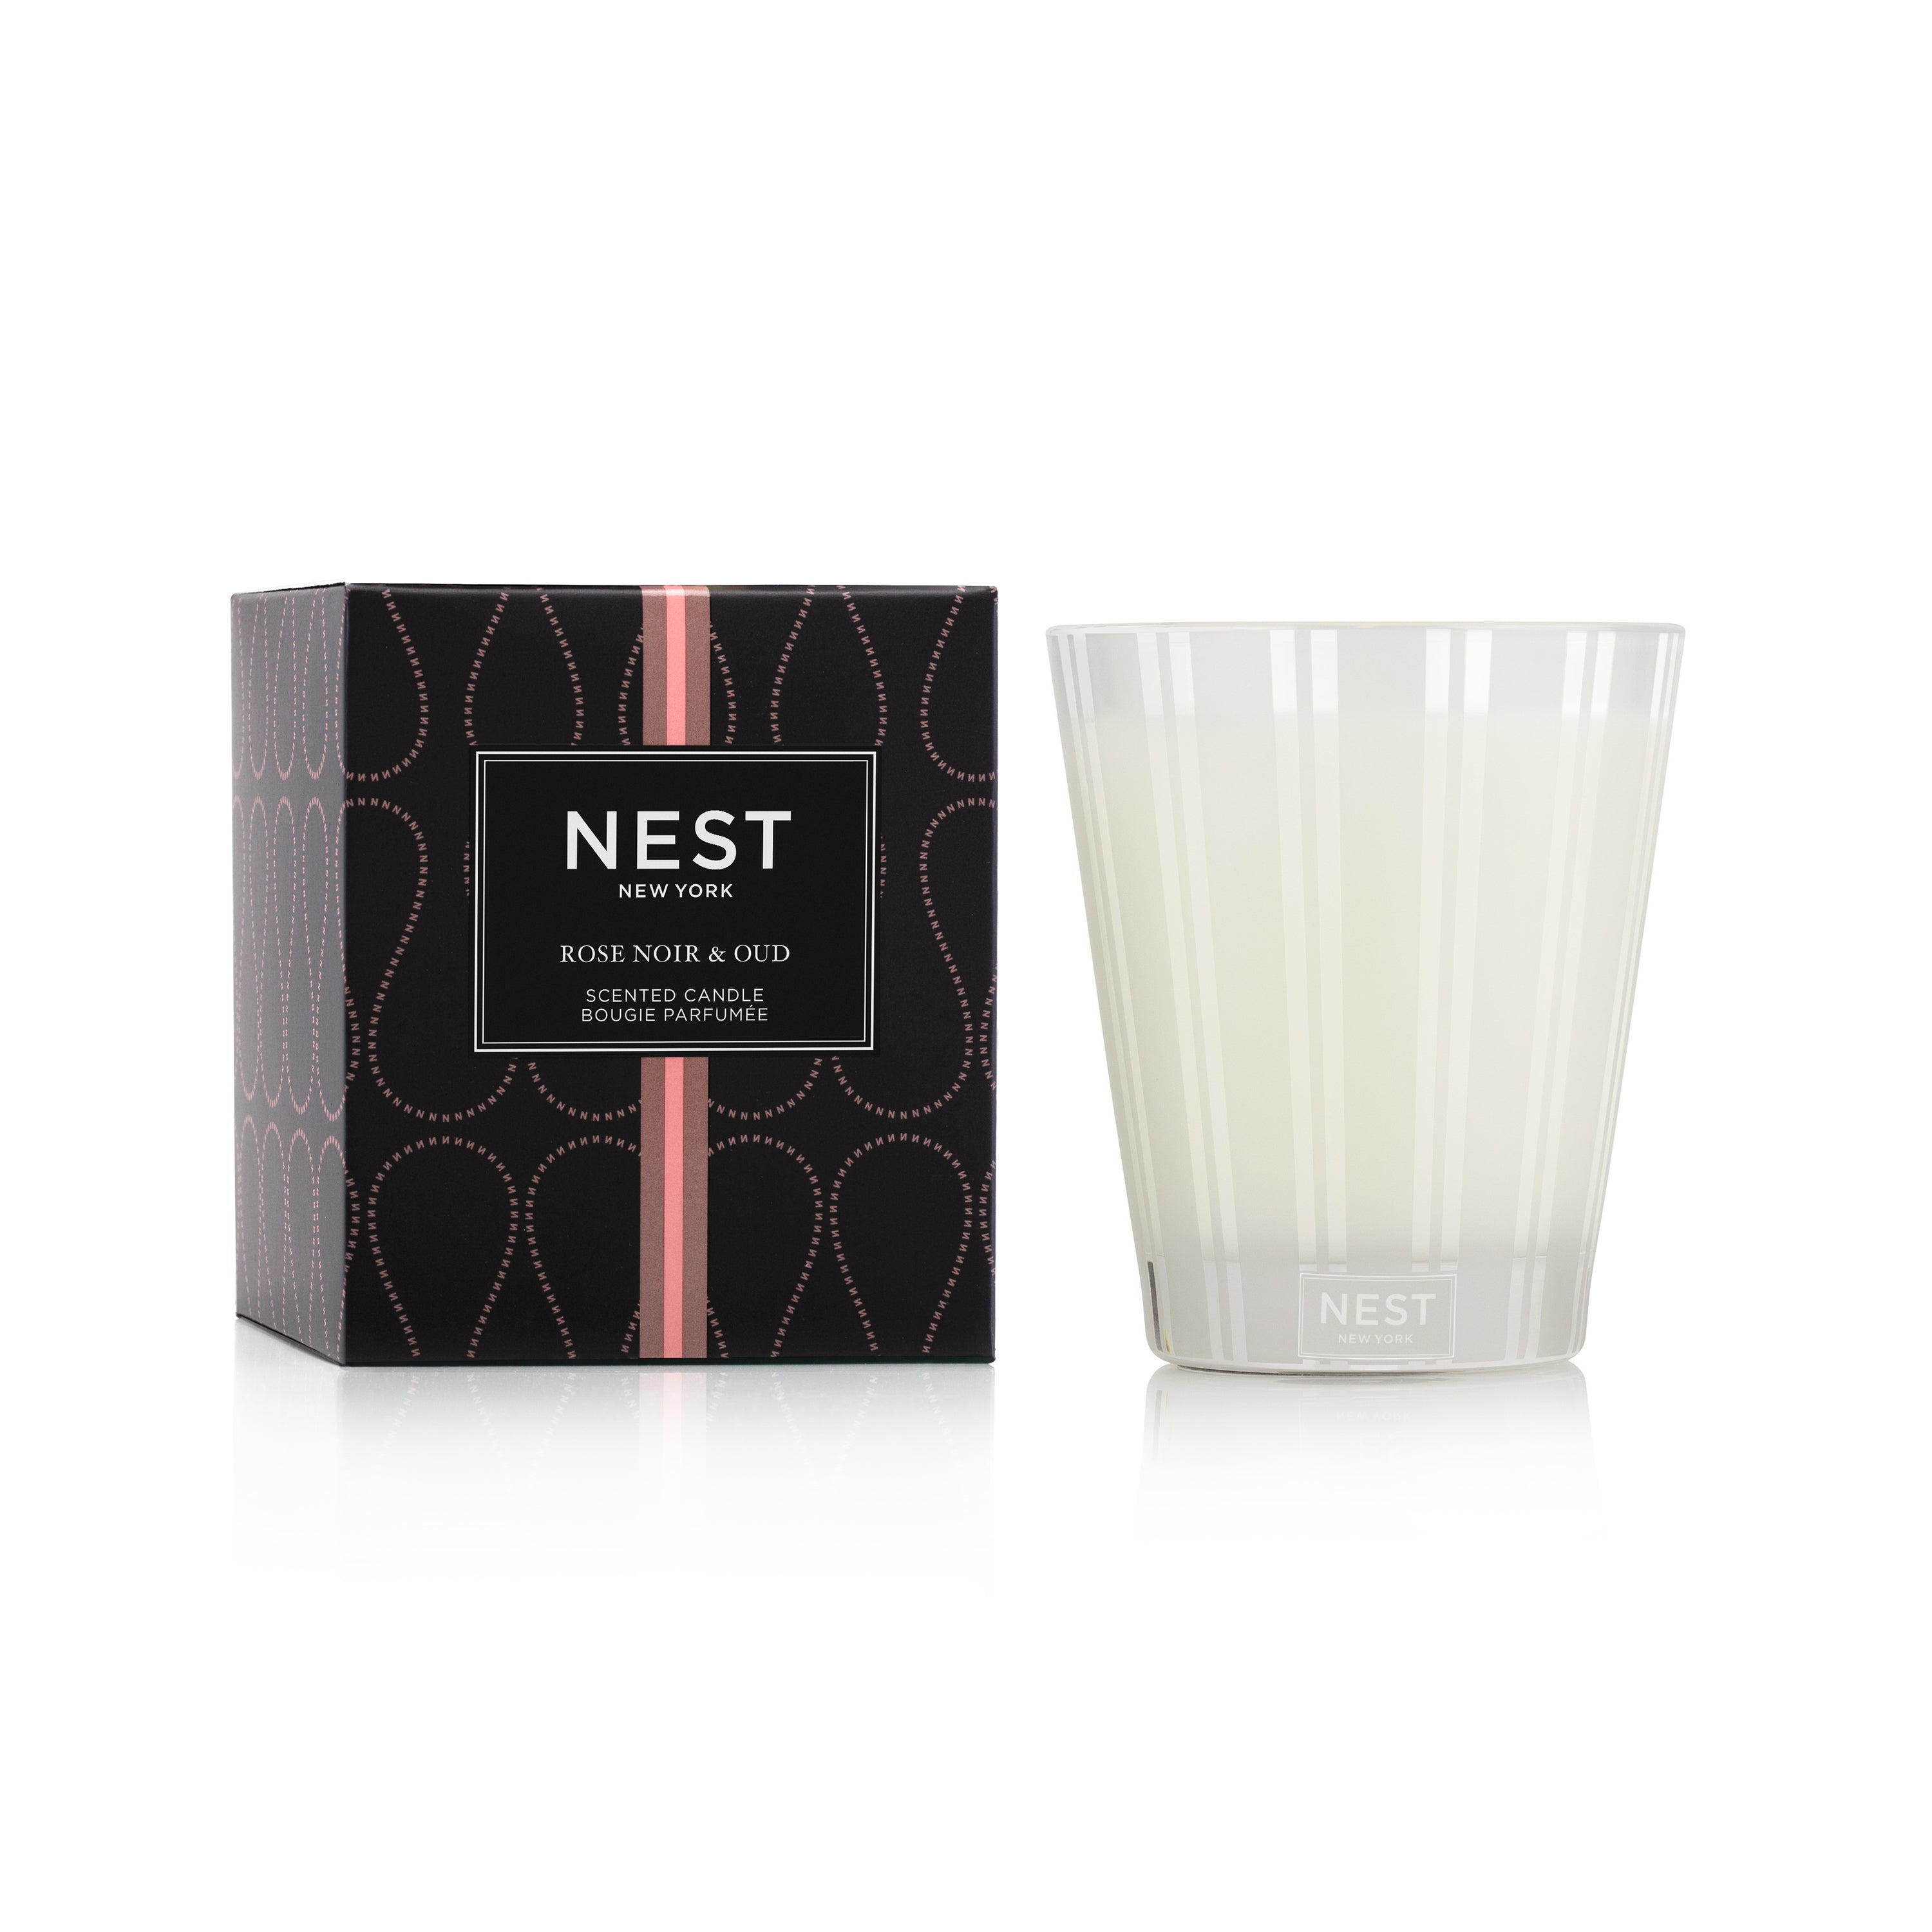 Rose Noir & Oud 8oz. Candle by Nest New York